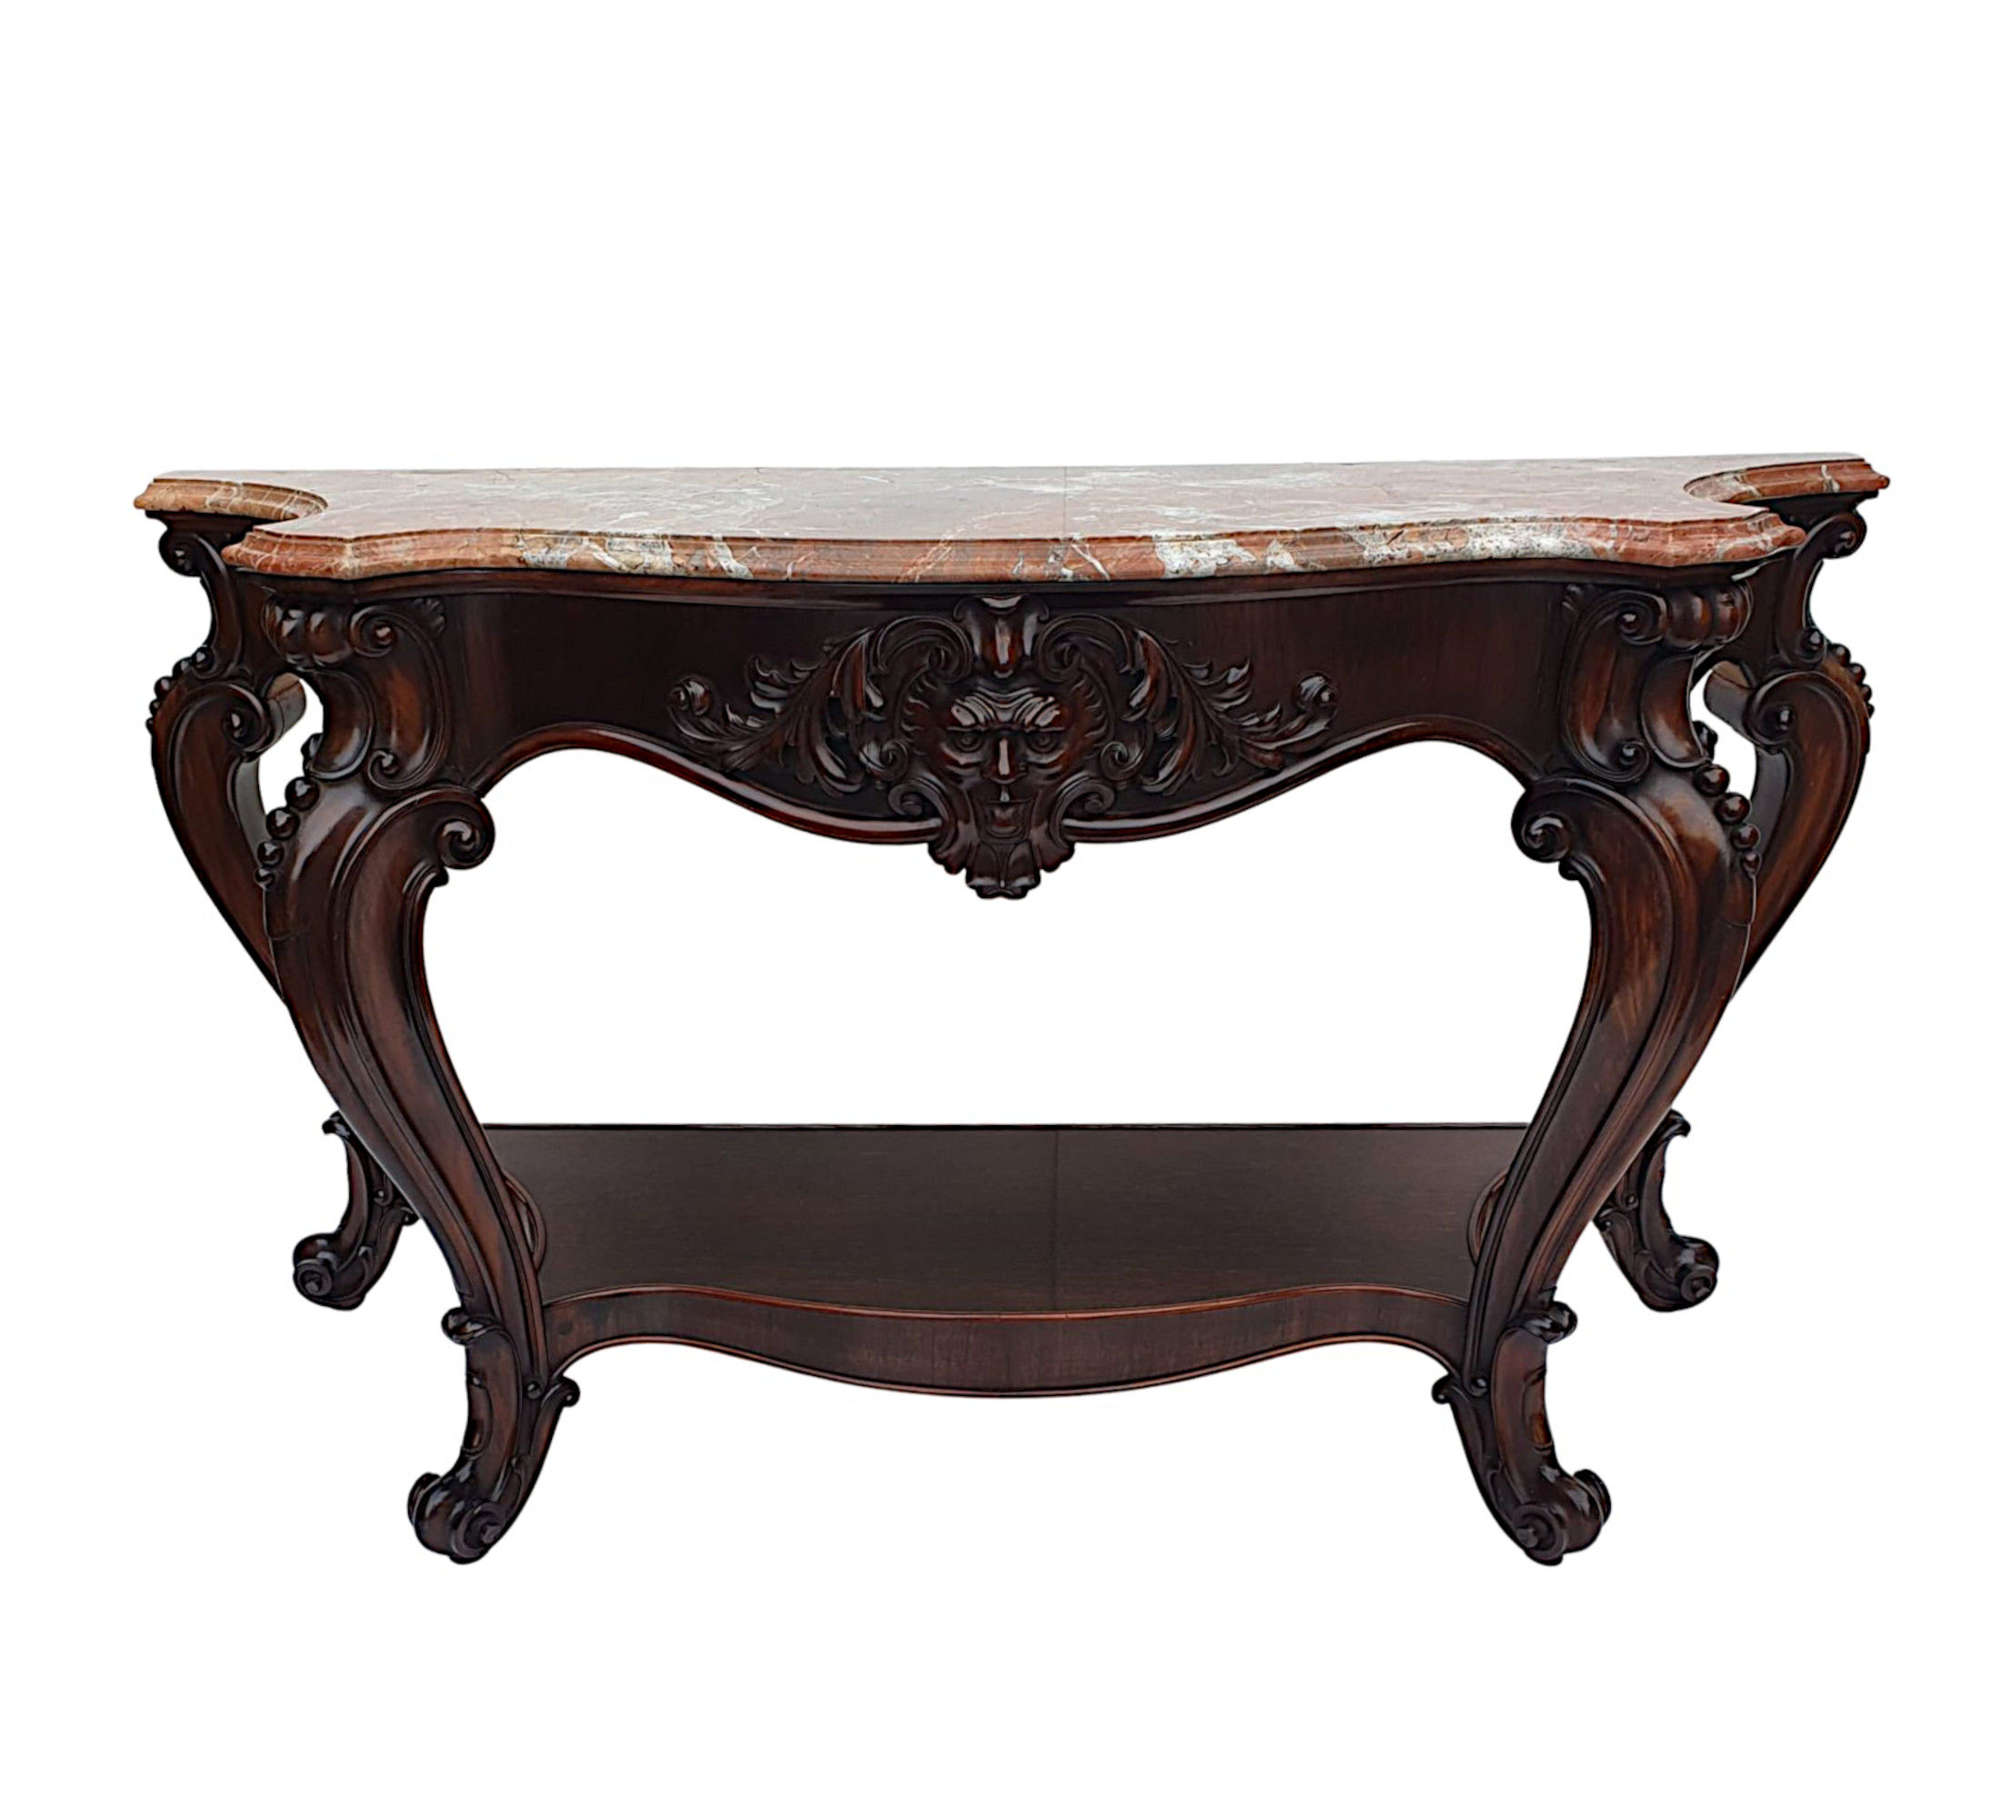 A Very Fine 19th Century Marble Top Console Table